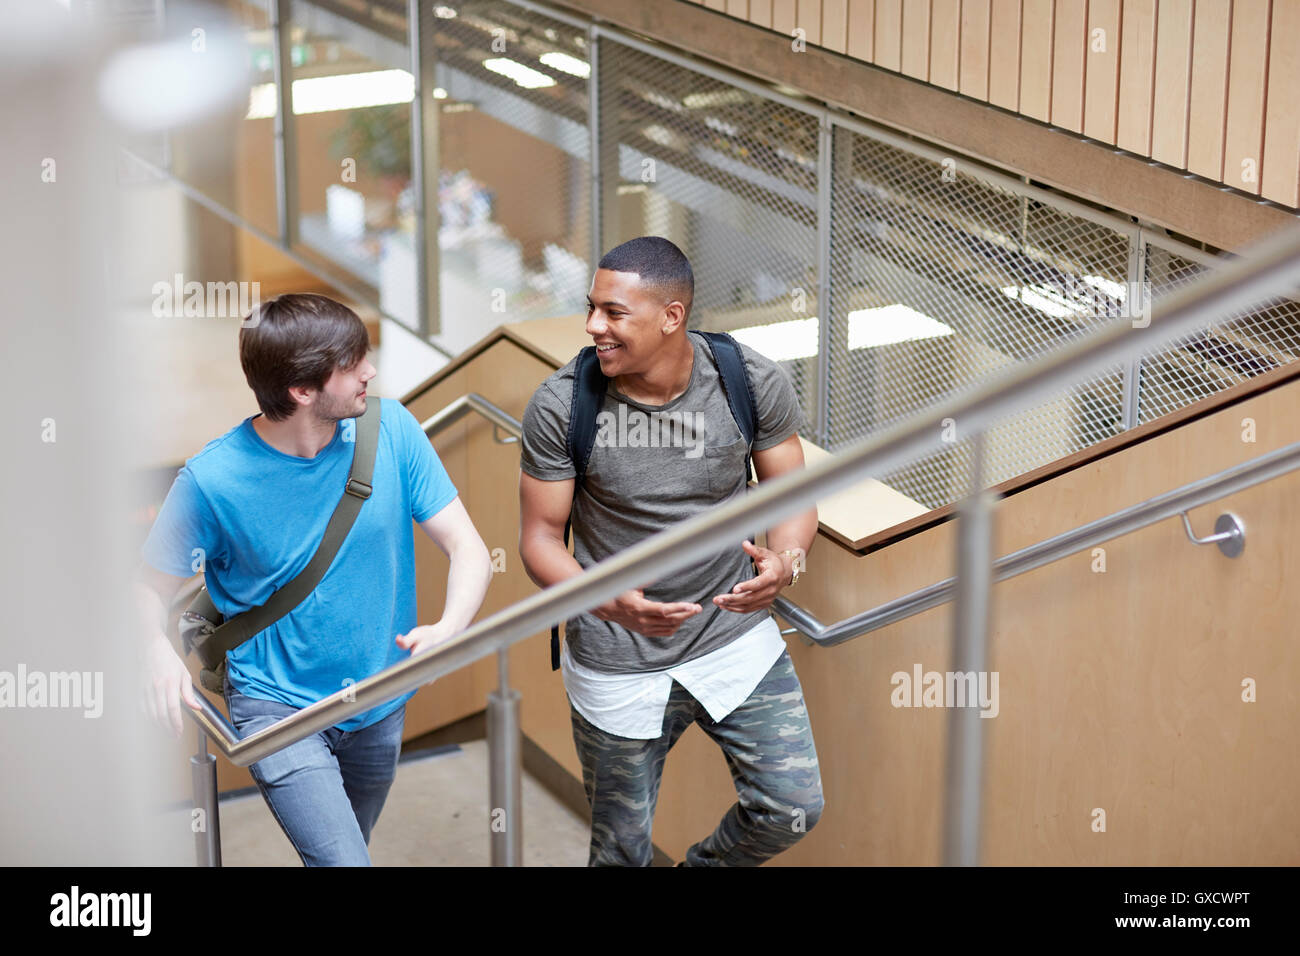 Two male students moving up stairway at higher education college Stock Photo